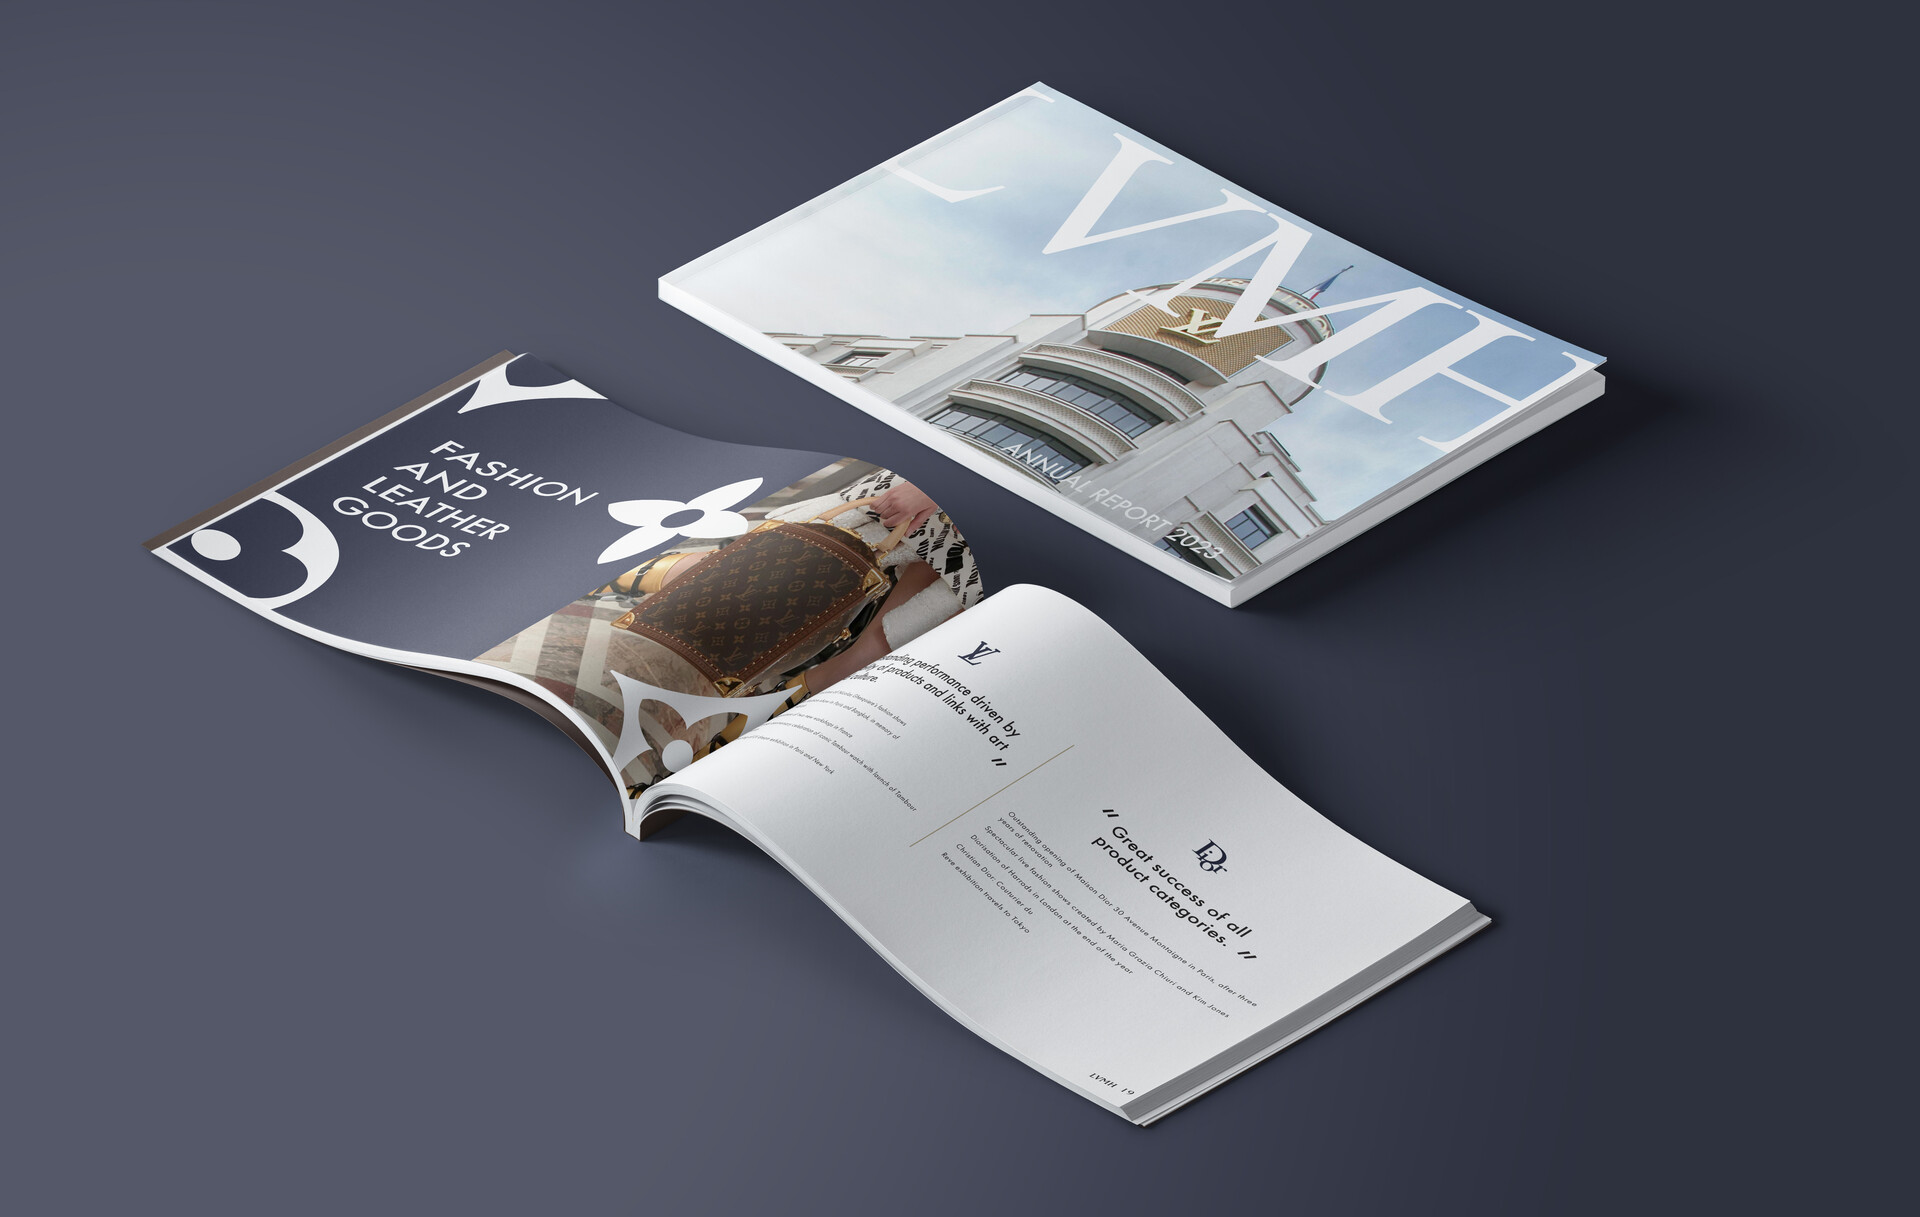 Image Art Direction and 3D graphics: LVMH annual report by Damien